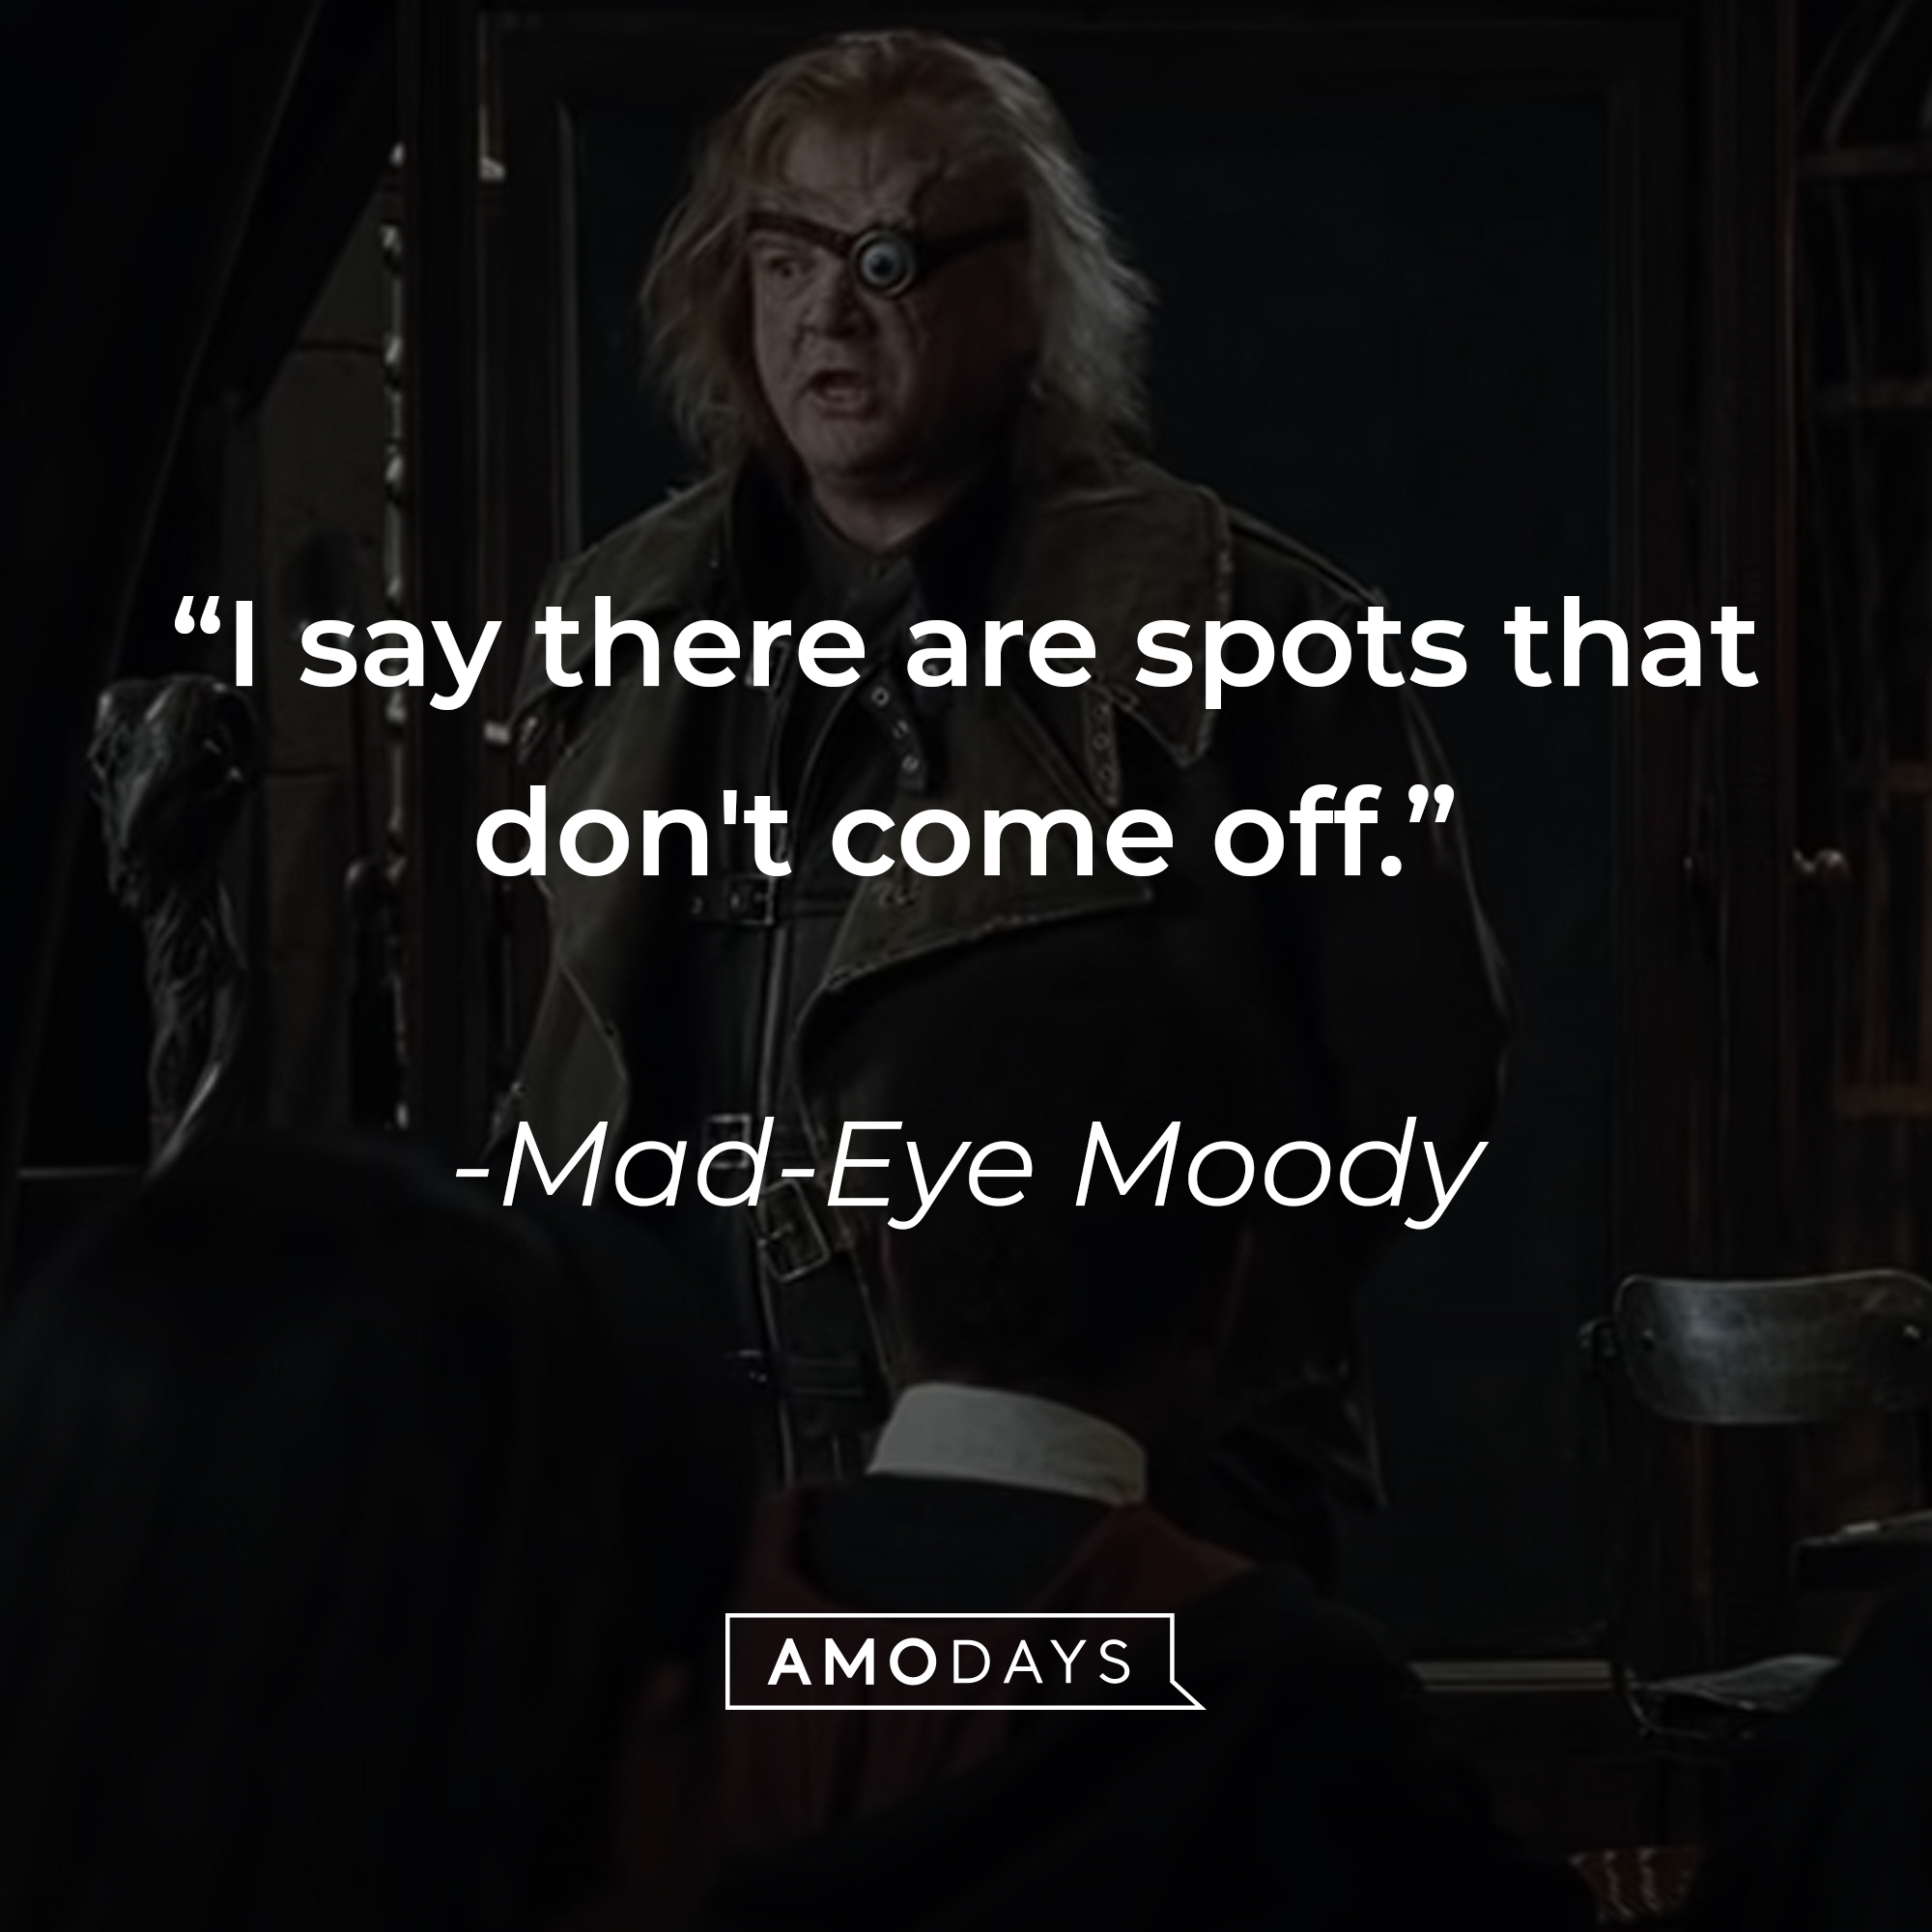 Mad-Eye Moody's quote: "I say there are spots that don't come off." | Source: youtube.com/harrypotter